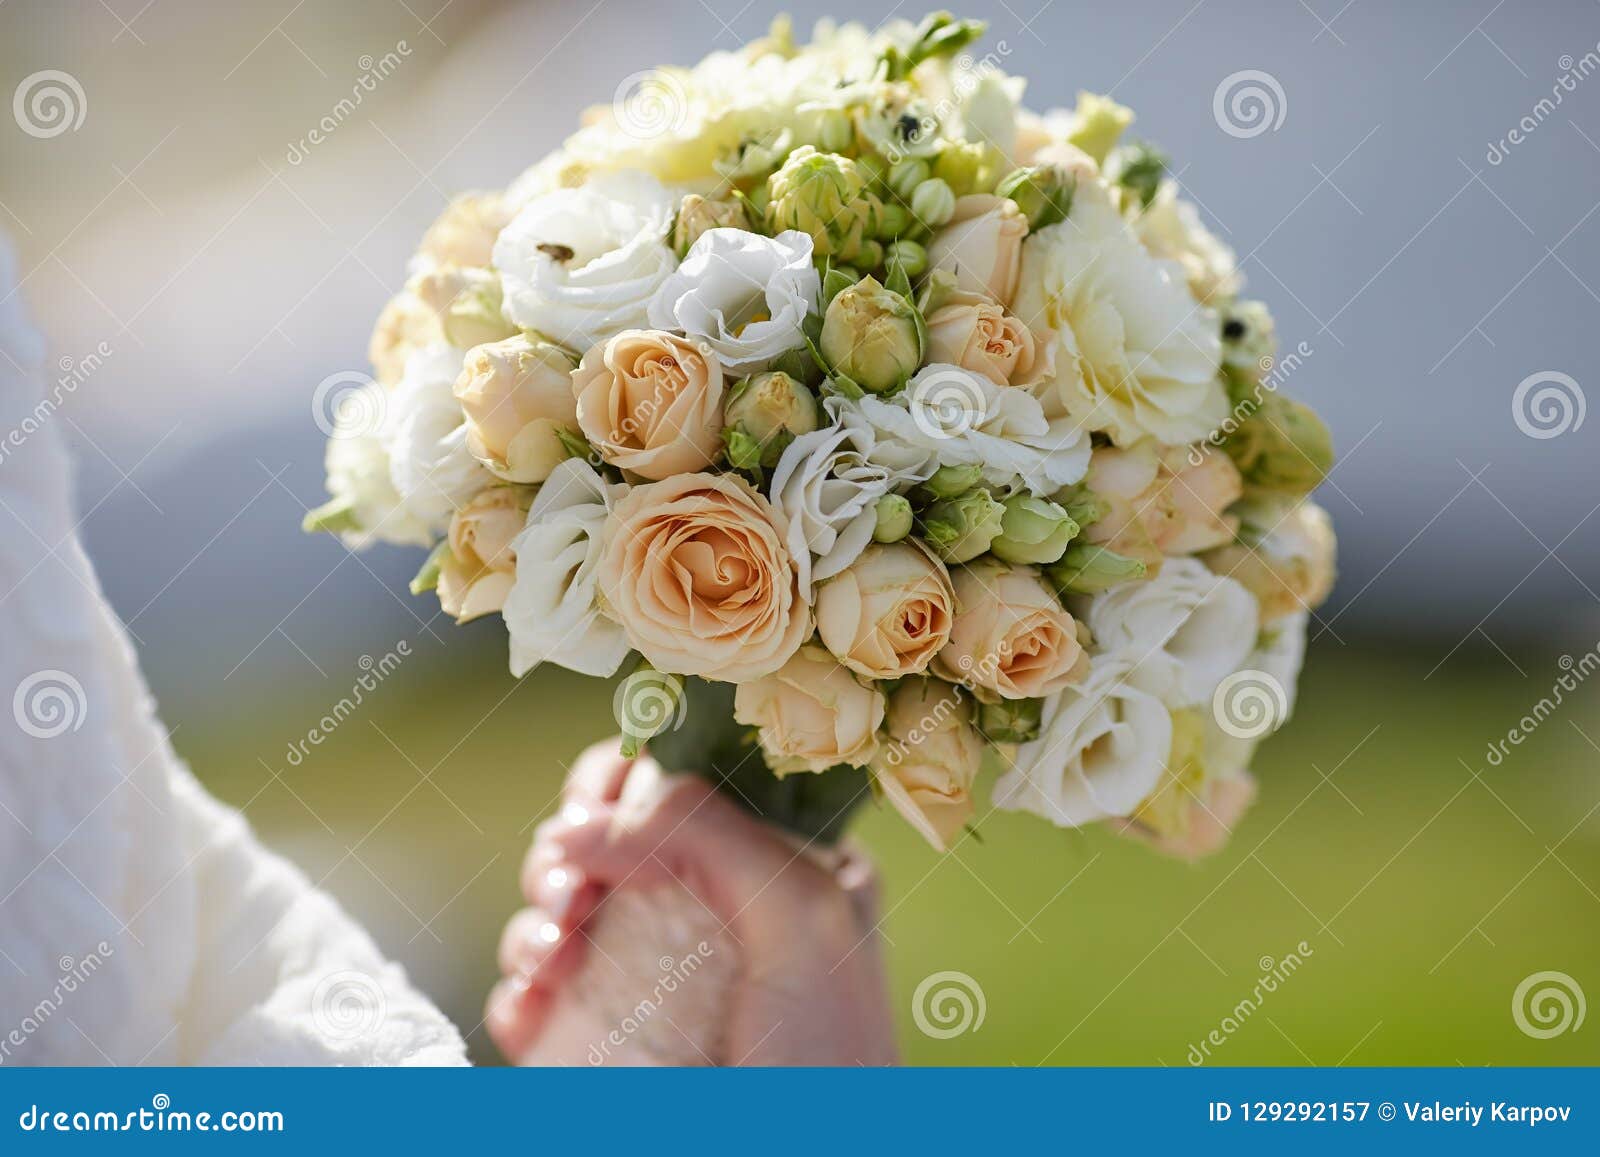 Wedding Bouquet of Flowers in Her Hand Stock Image - Image of bouquet ...